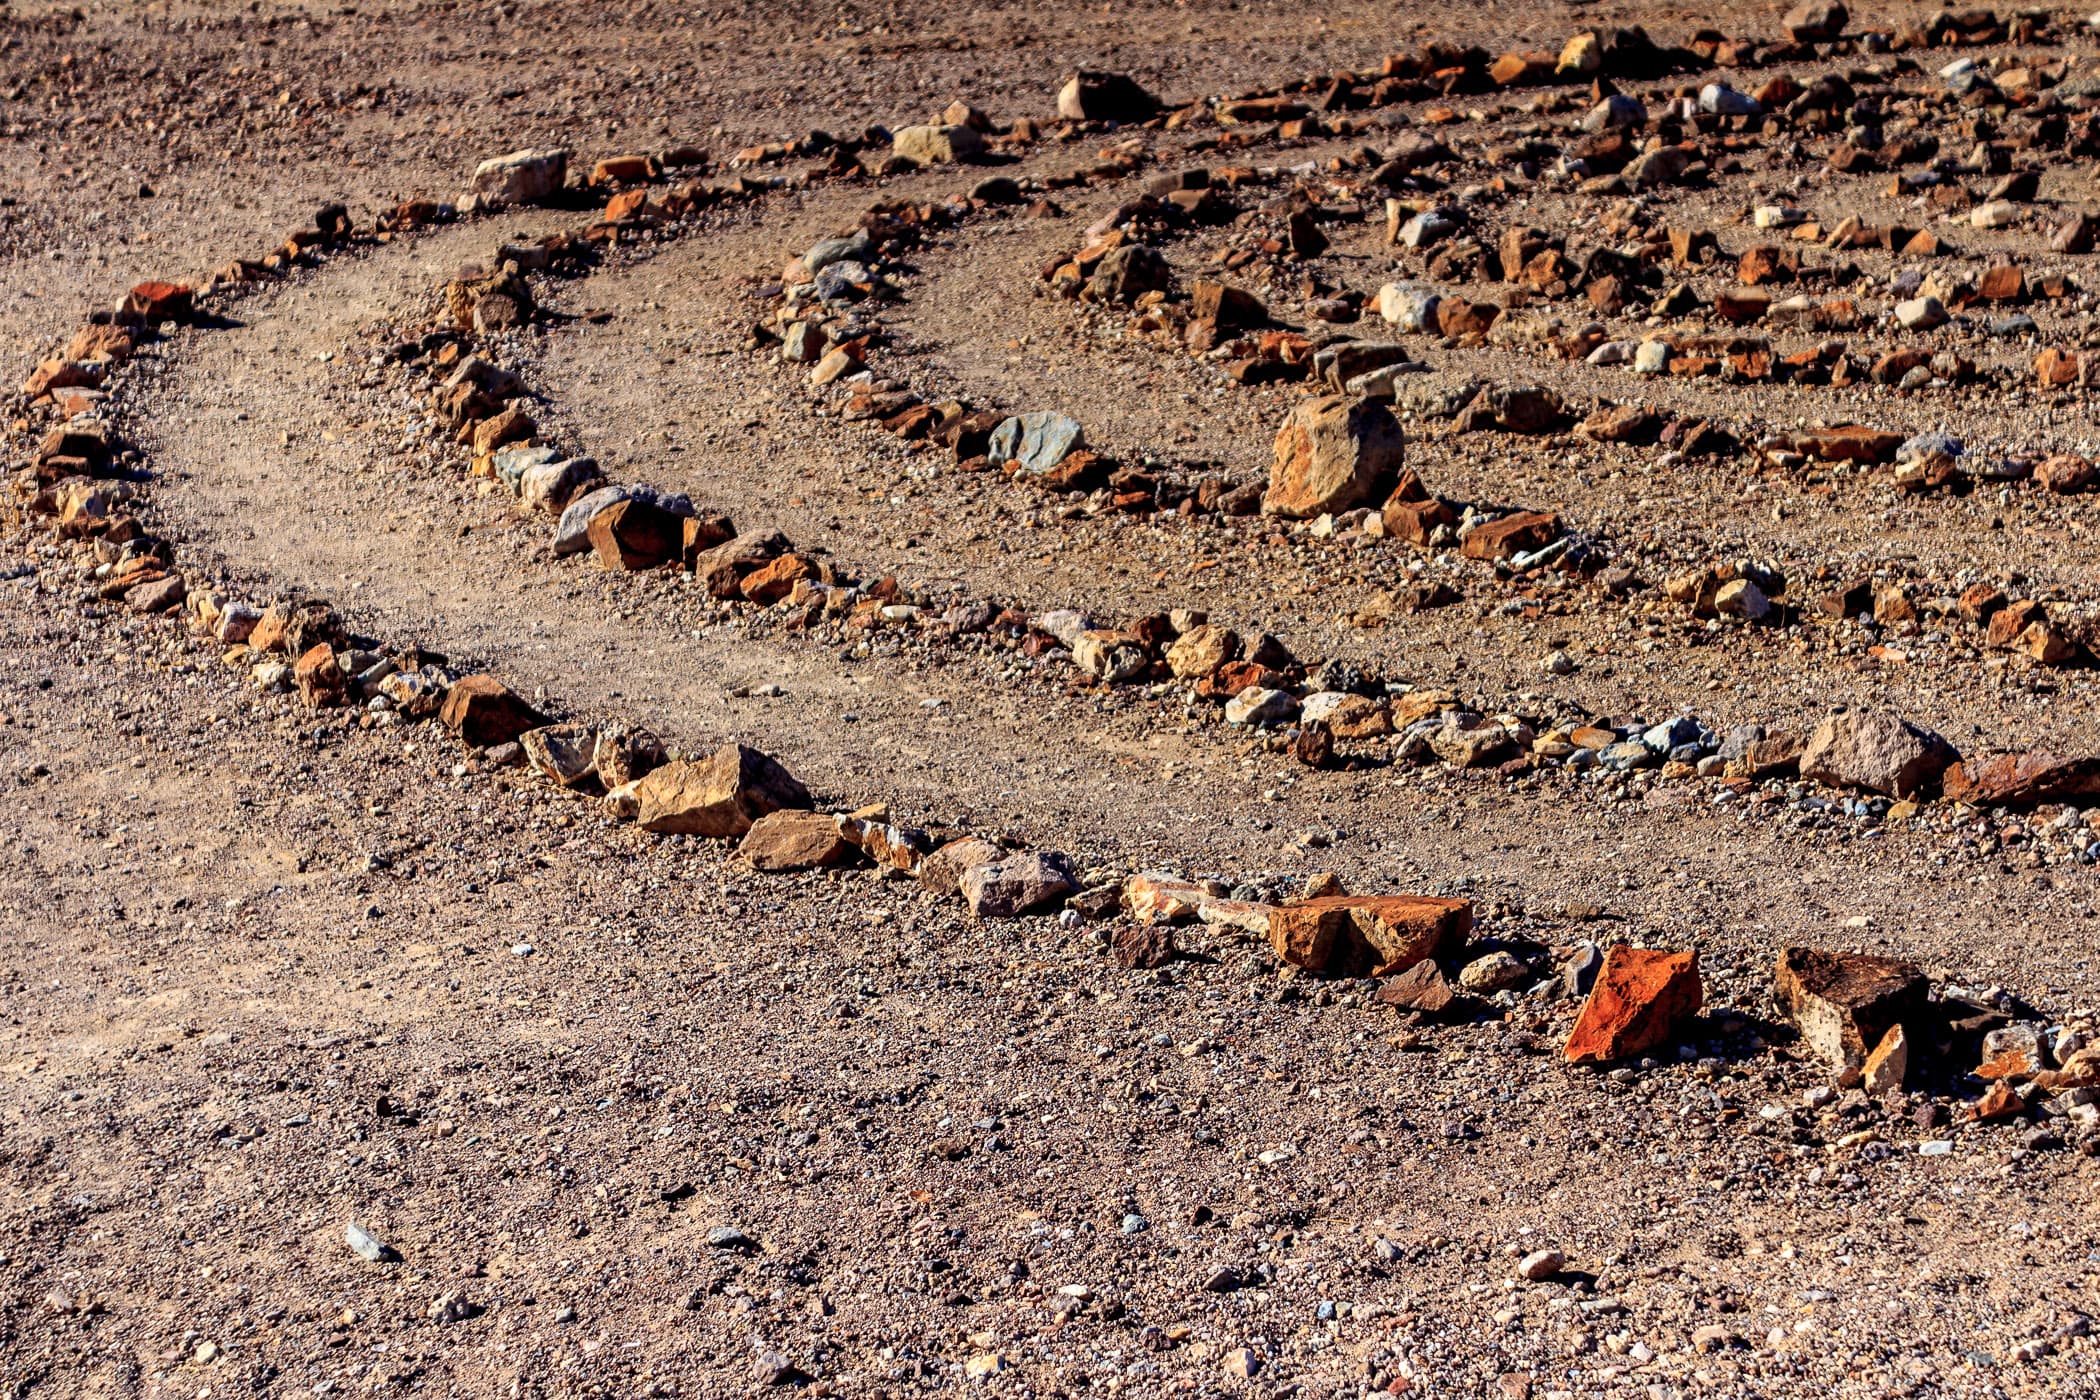 Rings of rocks form a large-scale artwork at the Goldwell Open Air Museum in the ghost town of Rhyolite, Nevada.